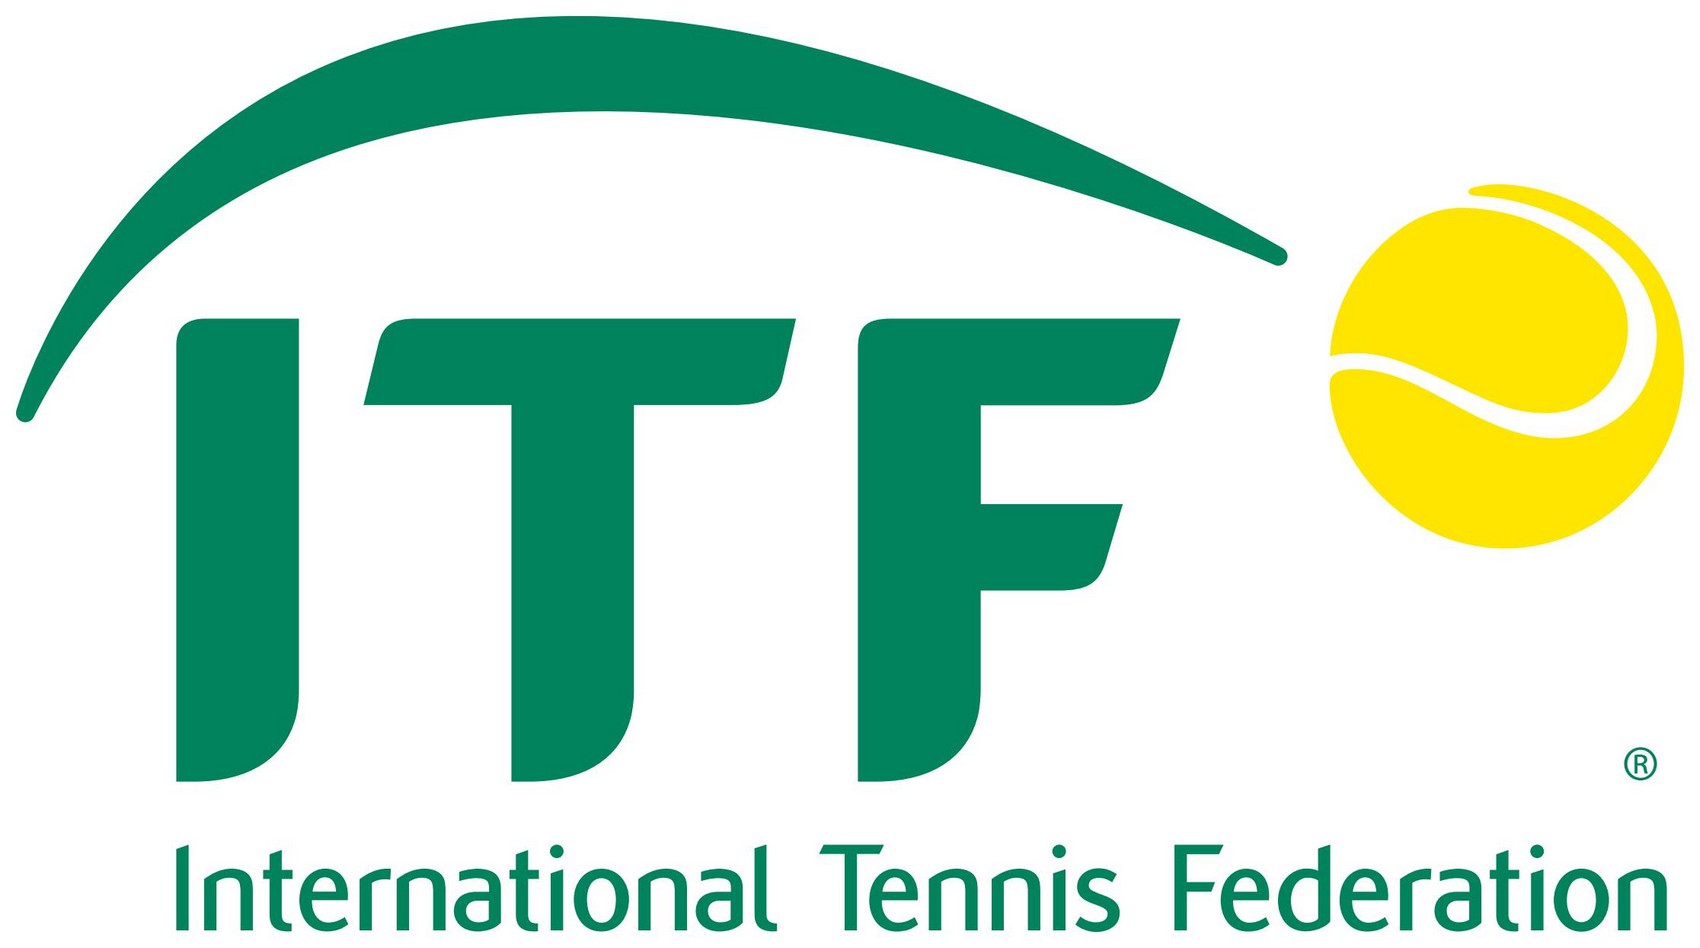 The ITF have announced that the 2014 Wheelchair Doubles Masters will return to Mission Viejo in California in 2014 ©ITF